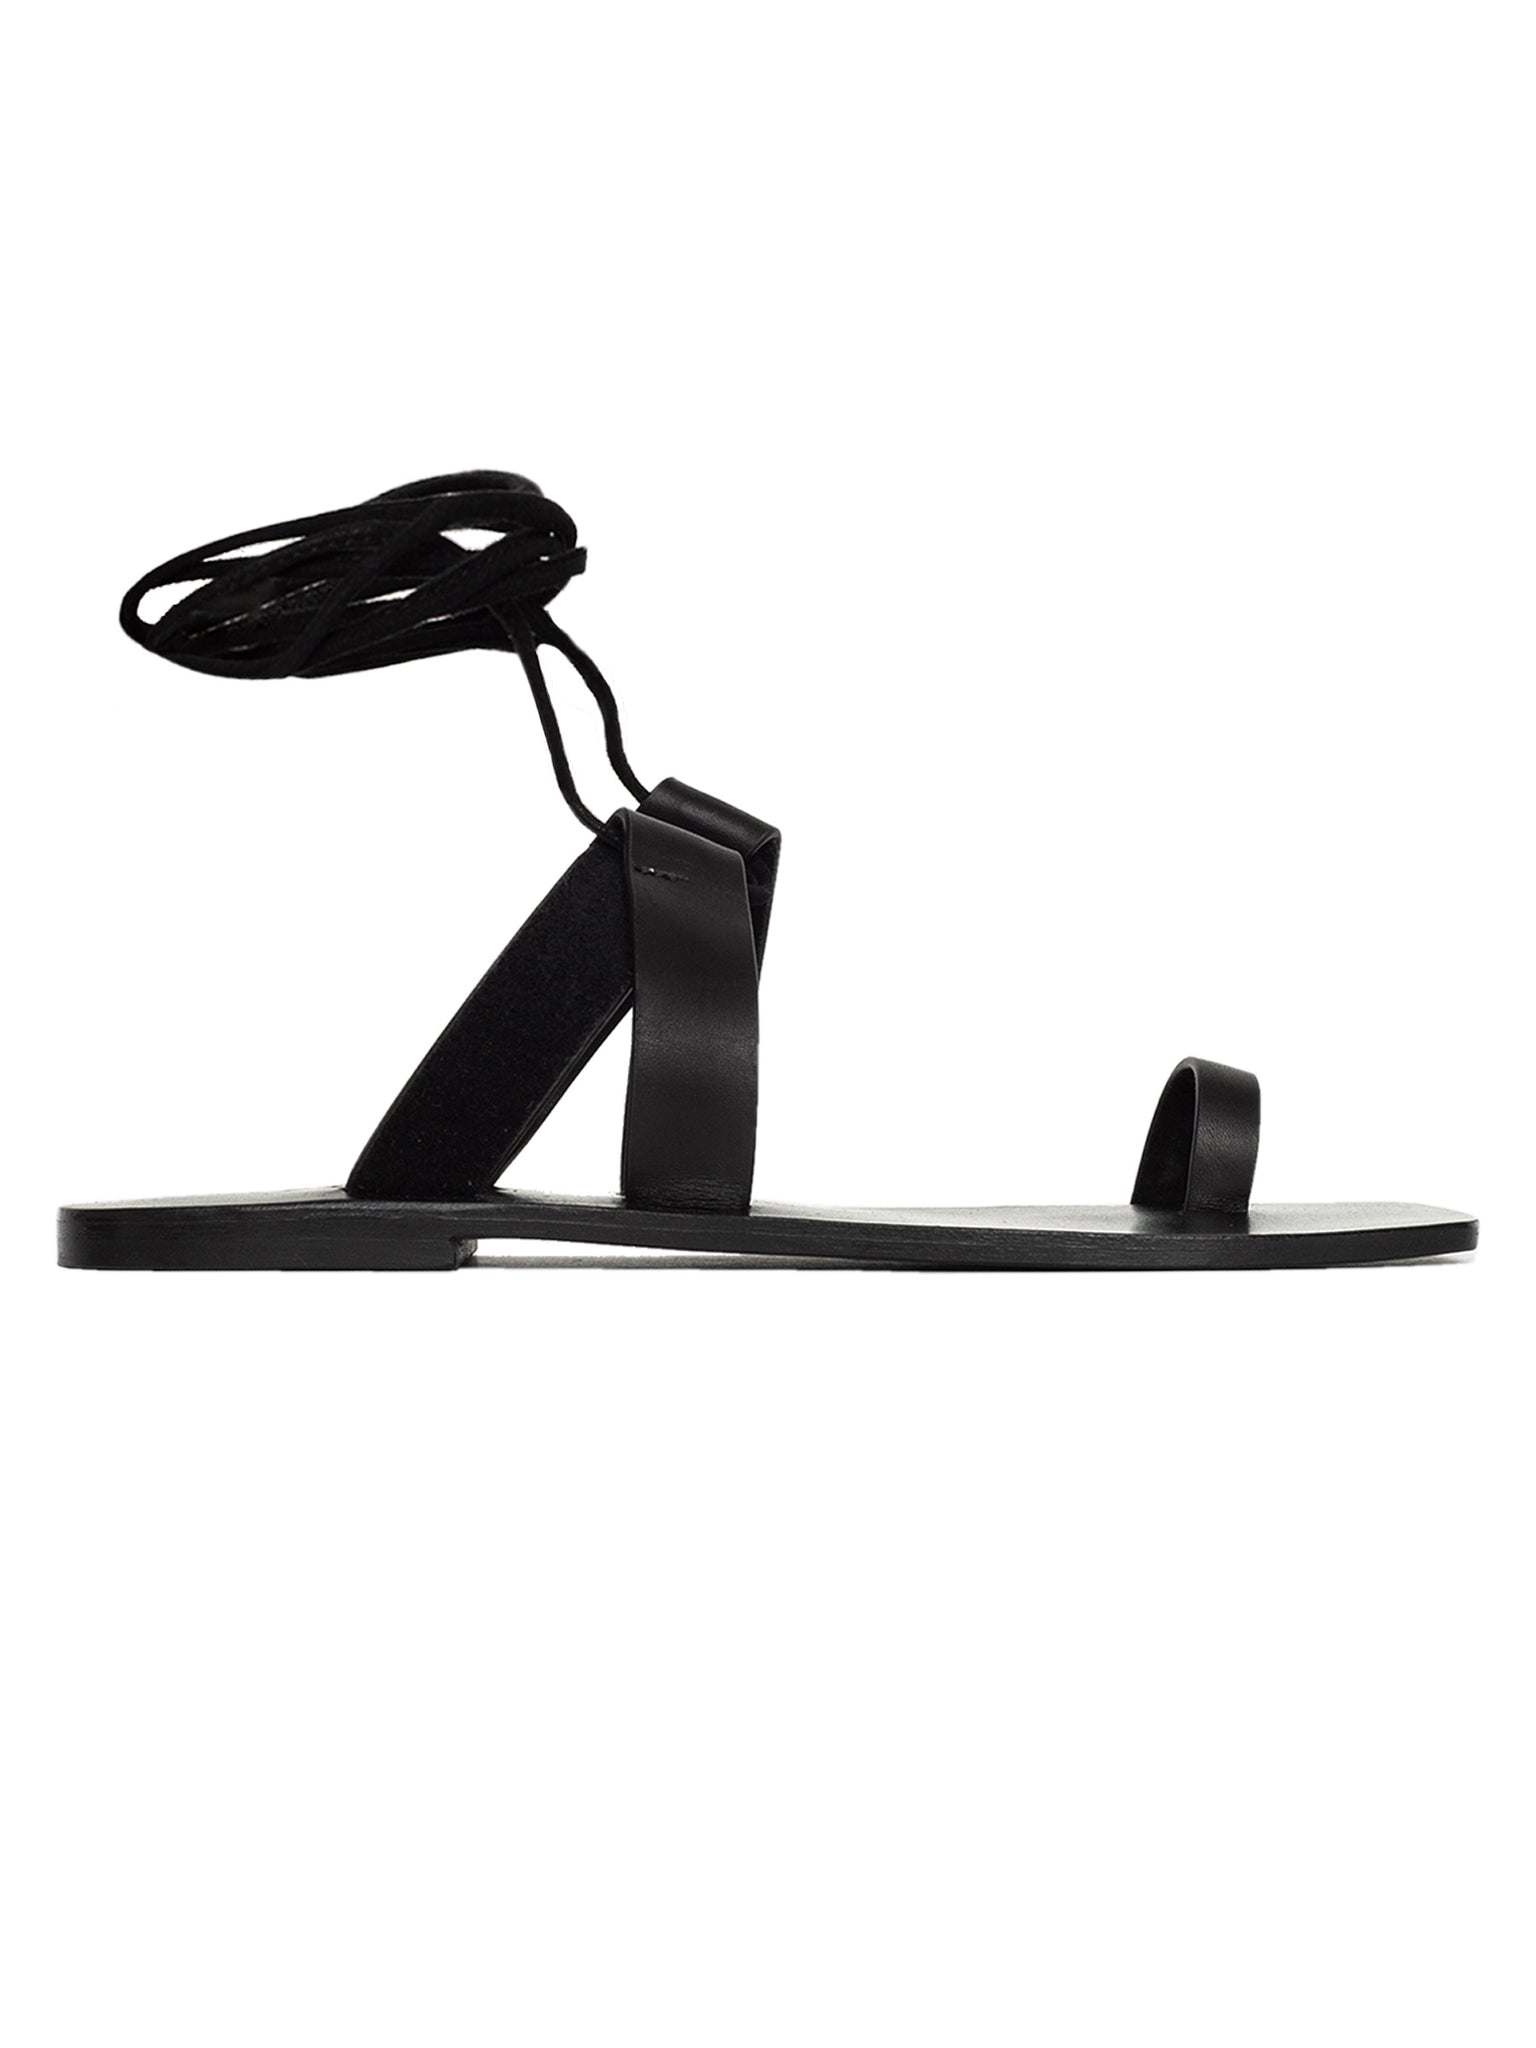 A.EMERY | Paige Sandals in Black | The UNDONE by A.Emery